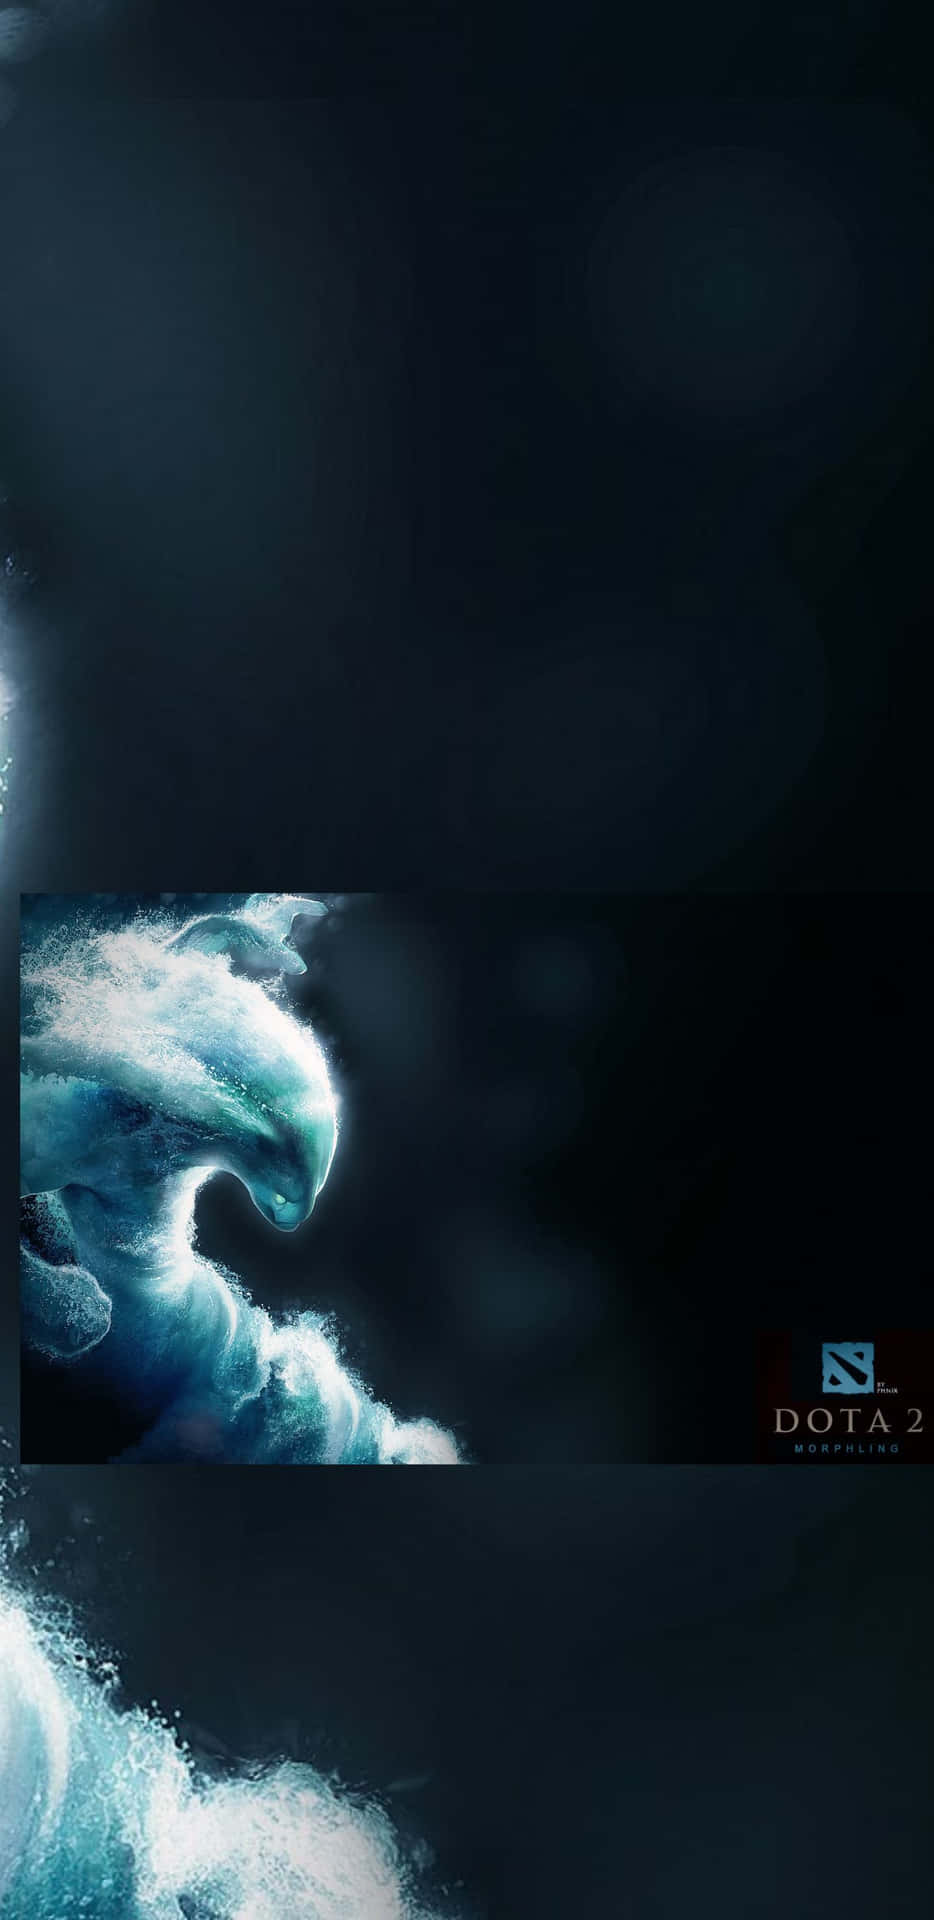 Pixel 3xl Dota 2 Background And Morphling